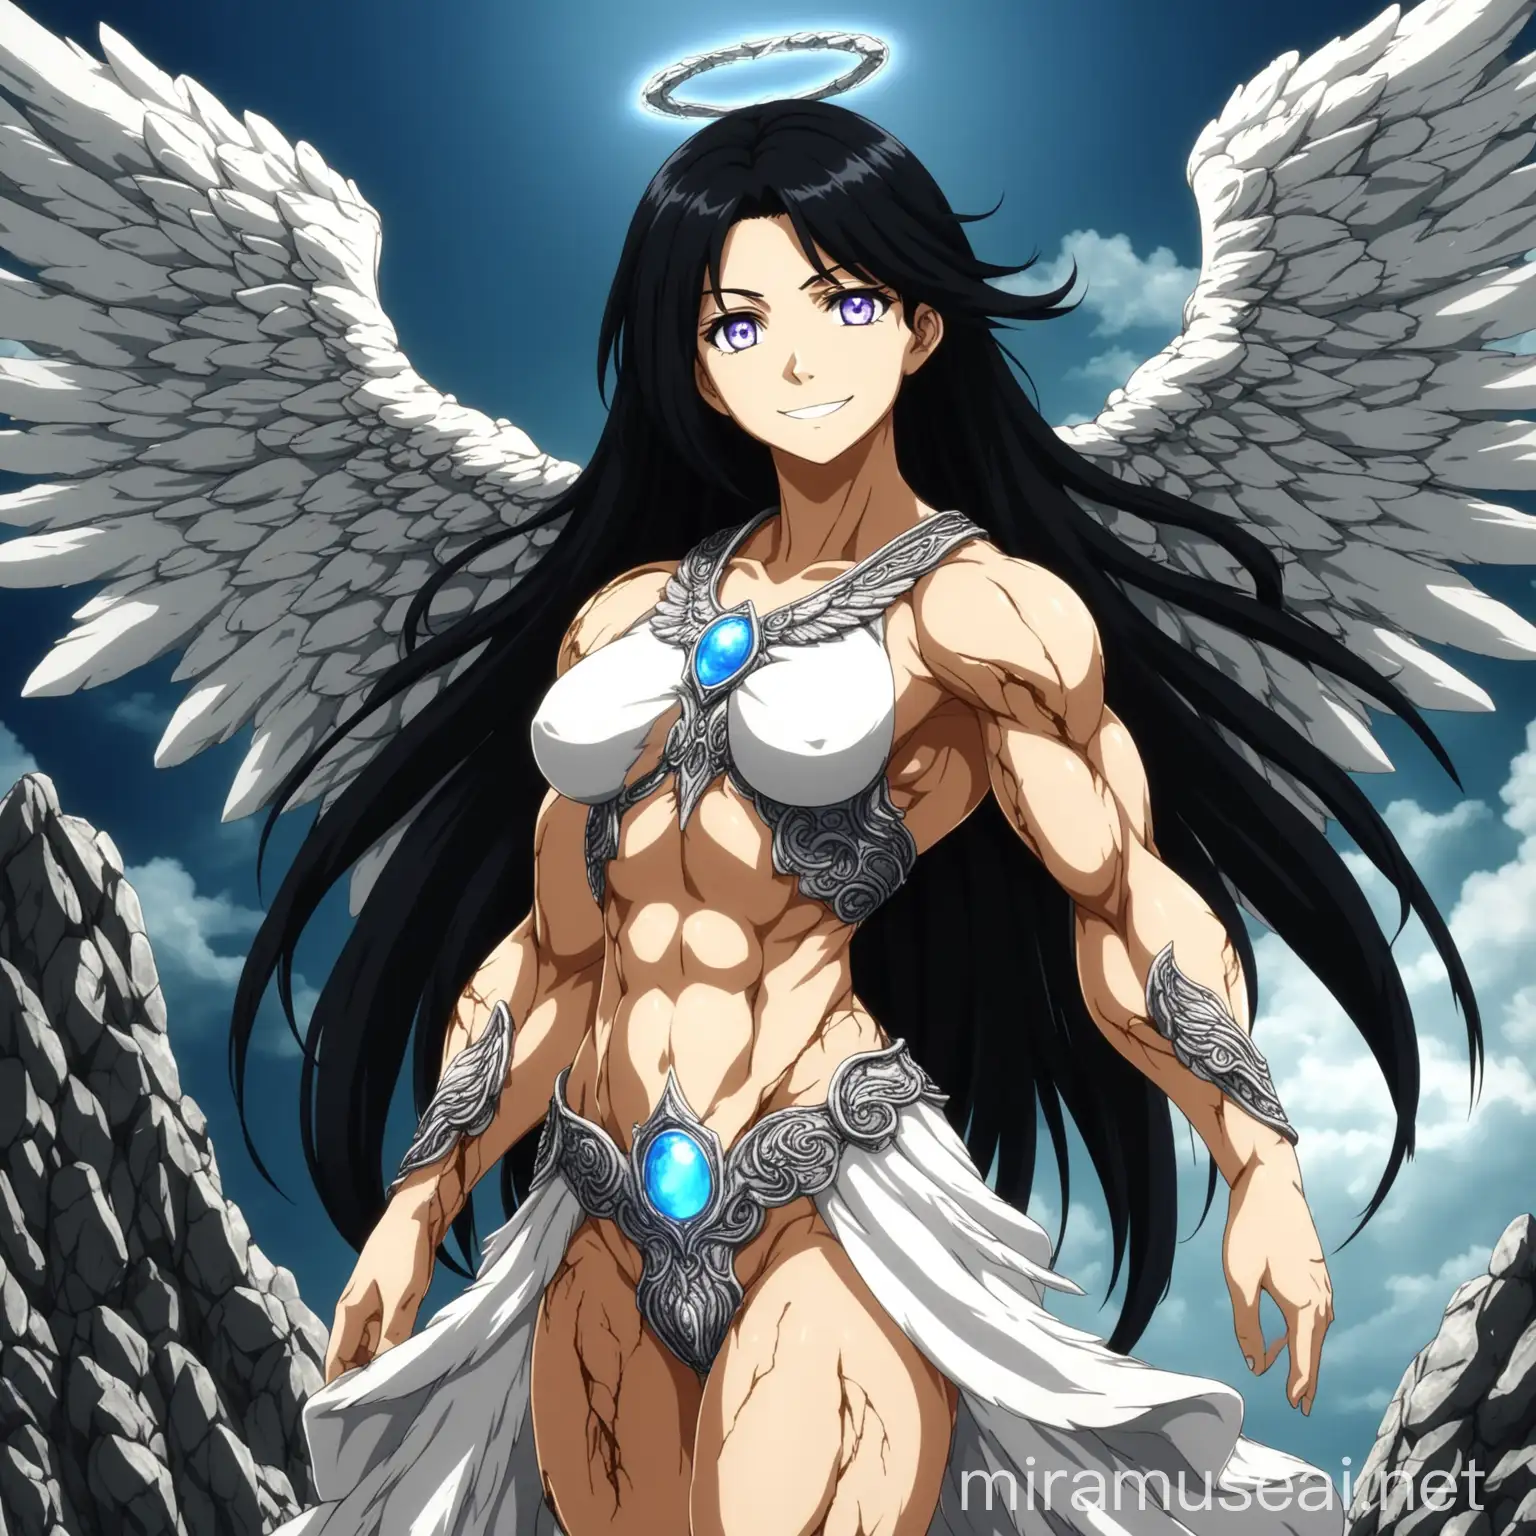 a female angel made of stone, she has stone angel wings, she is muscular, her skin is real rock with mineral veins even in face, she has wild black hair, she has white lumionus eyes. she has a smile on her face. in anime